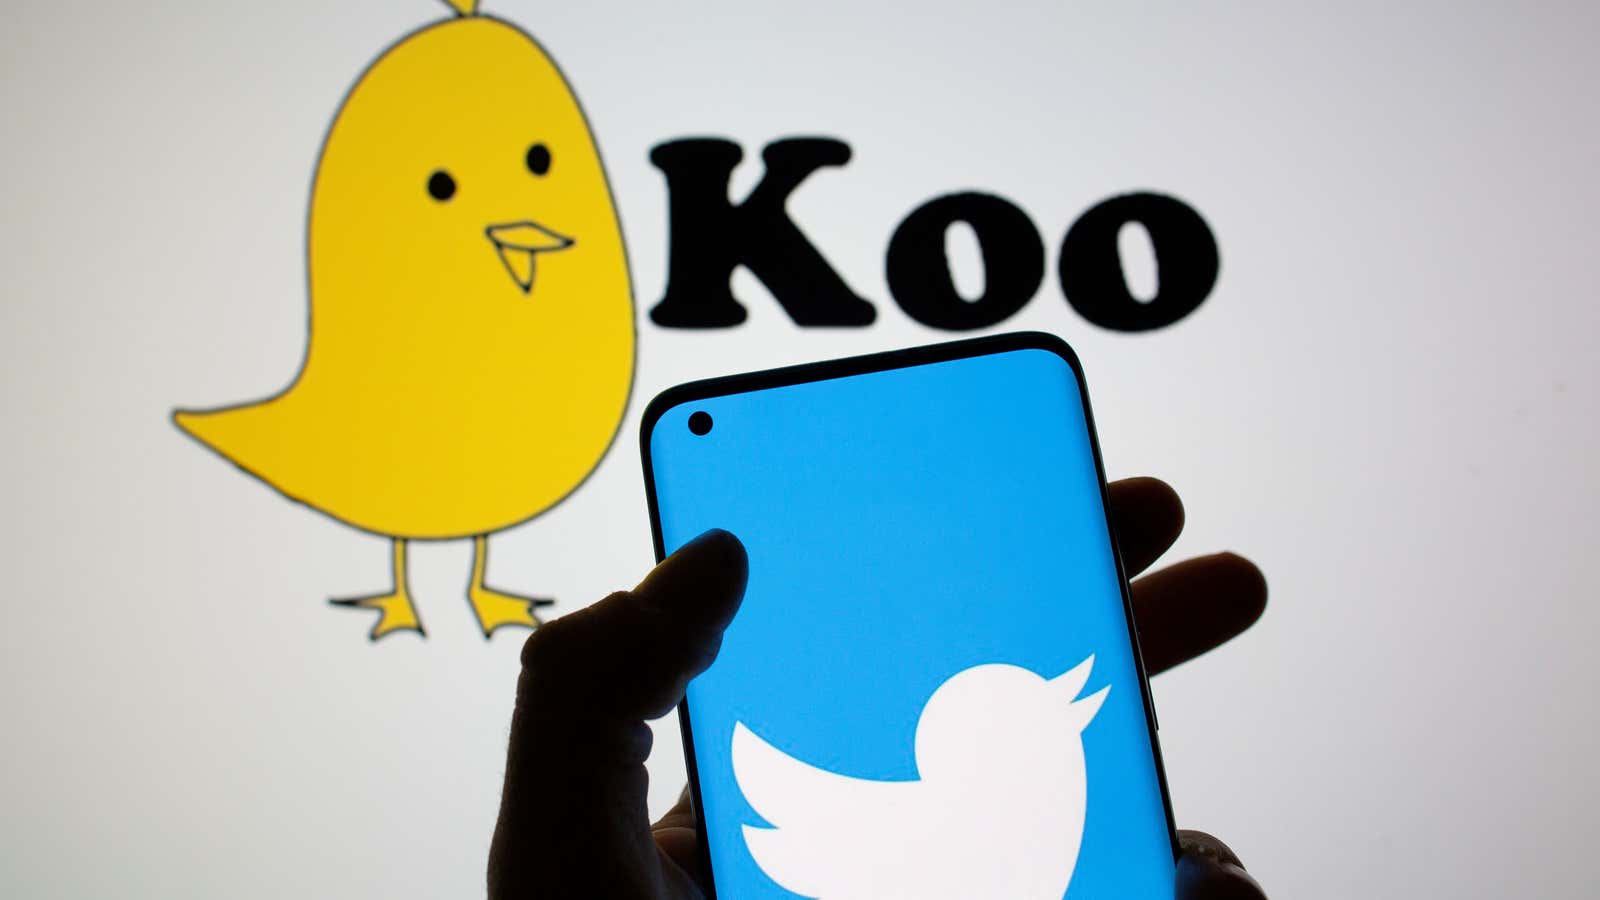 Nigeria’s Twitter ban favors a move to Koo